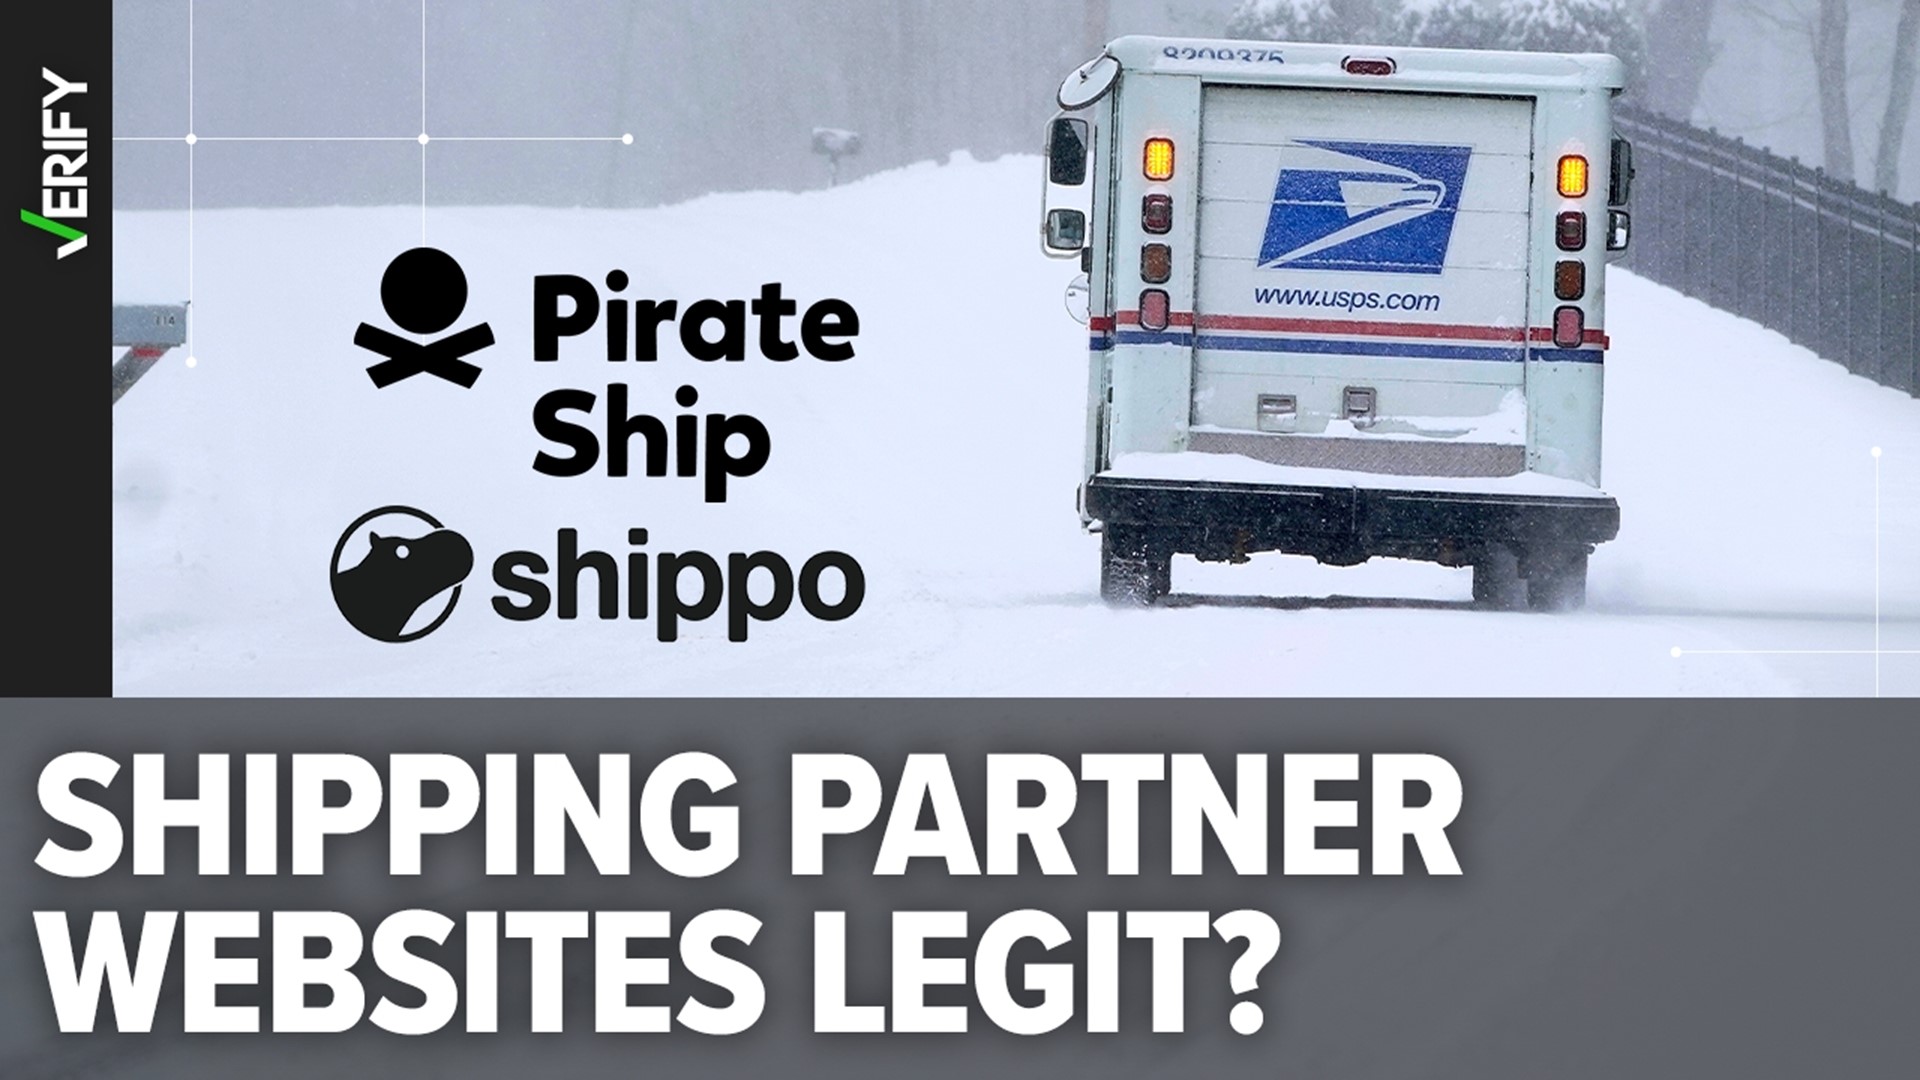 Pirate Ship and Shippo are legitimate websites that partner with the USPS to offer shipping services at discounted rates. Here’s how you can save money.